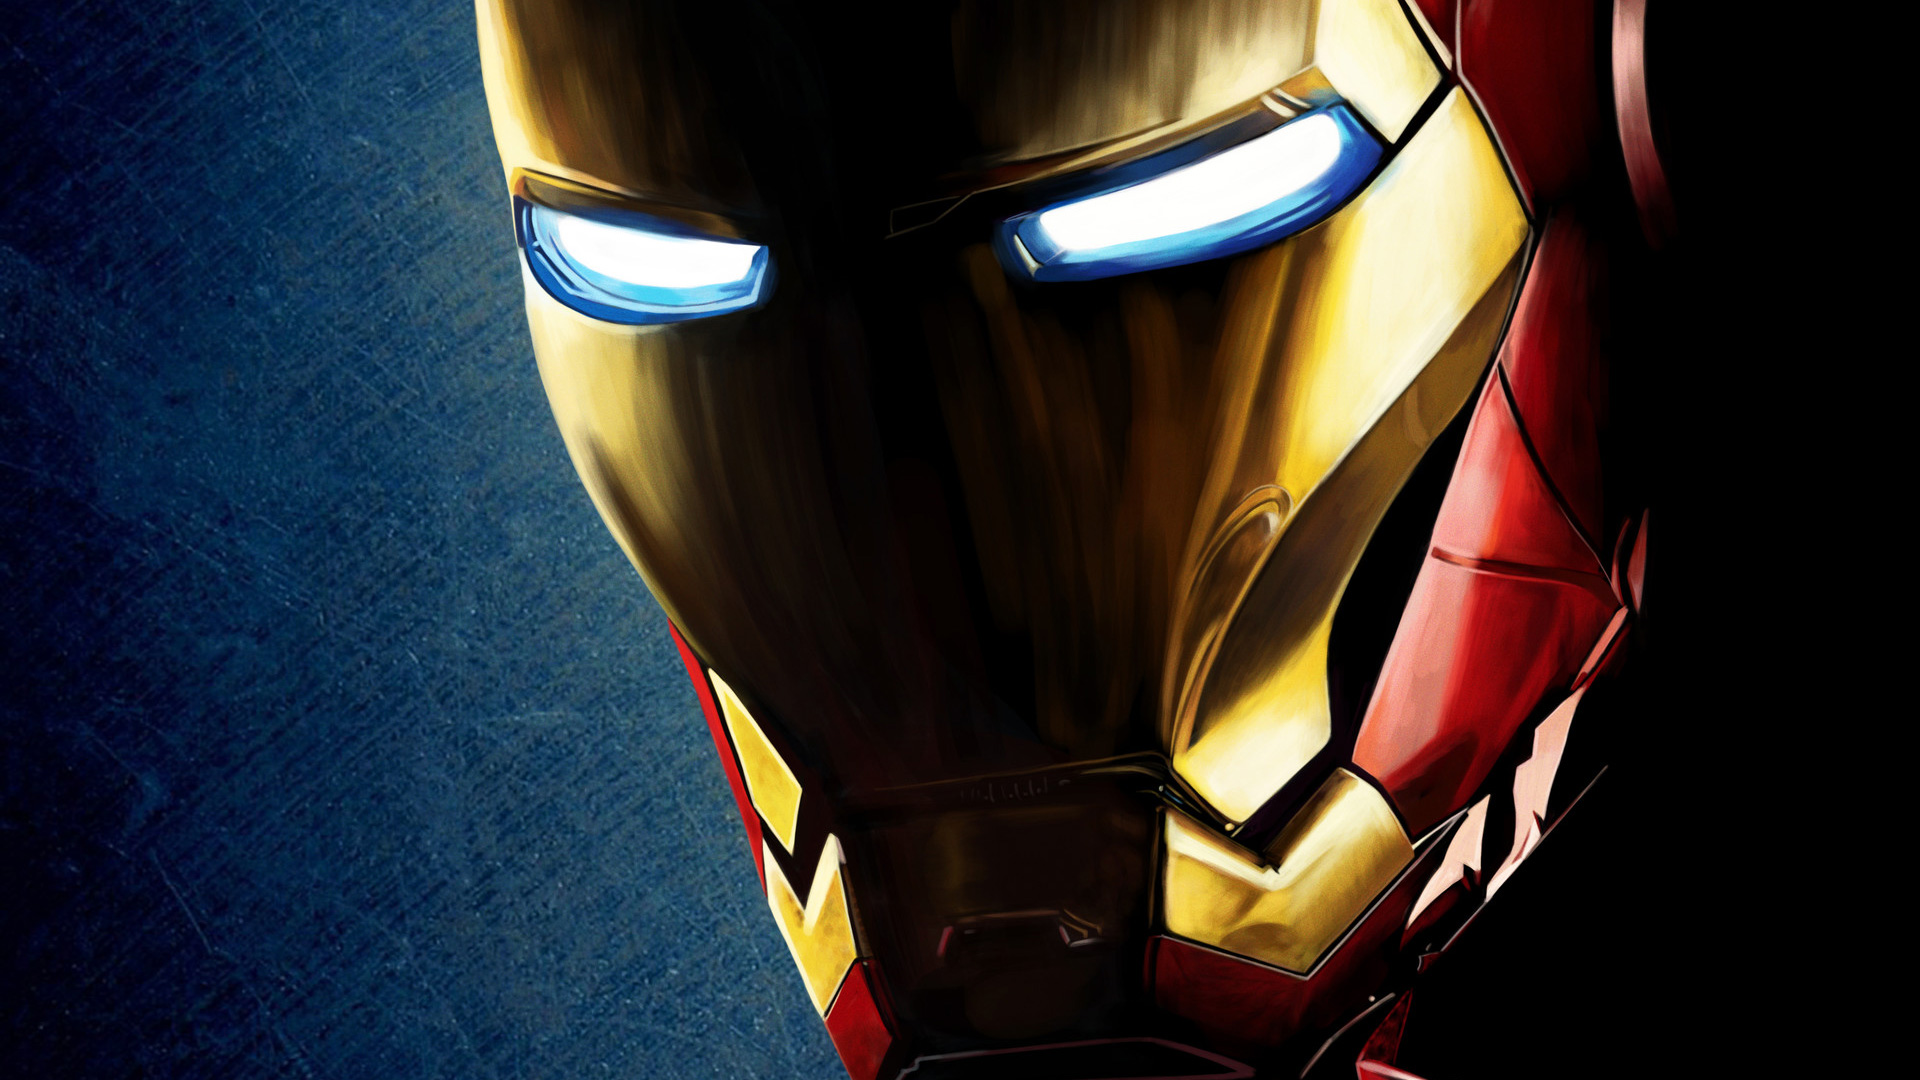 Iron Man 1080p, HD Superheroes, 4k Wallpapers, Images, Backgrounds ...